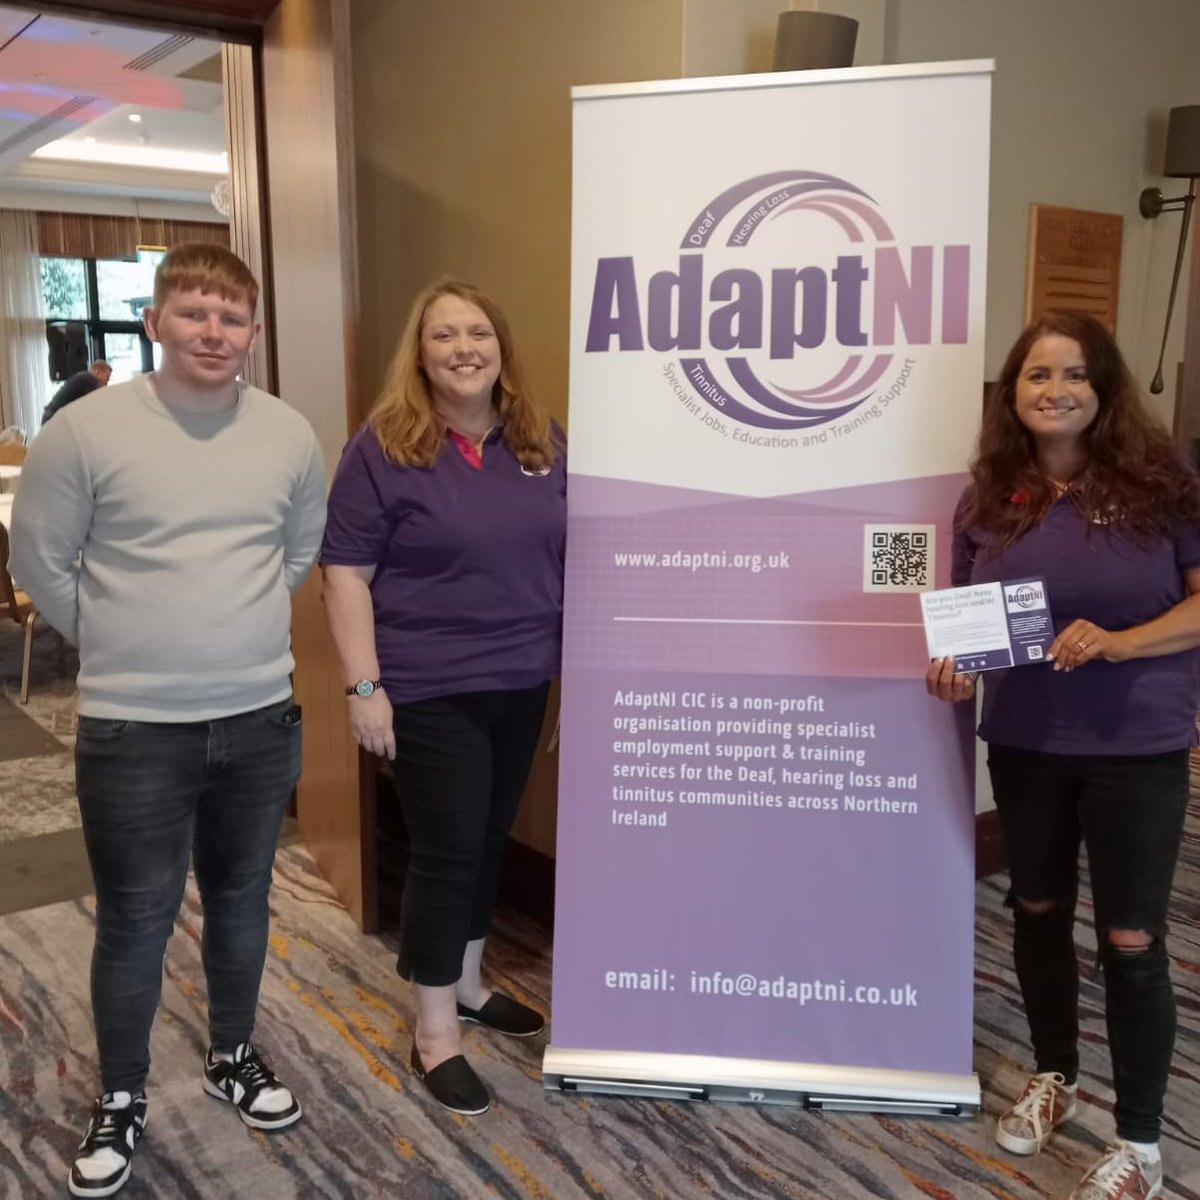 Yesterday we kicked off #DeafAwarenessWeek @hiltontemplepatrick
Such fun and inclusive entertainment and service (all staff know BSL) 💜

Huge thanks to everyone who attended and supported, we raised nearly  £500!!!!!!! 

All money raised goes directly into service delivery 💜